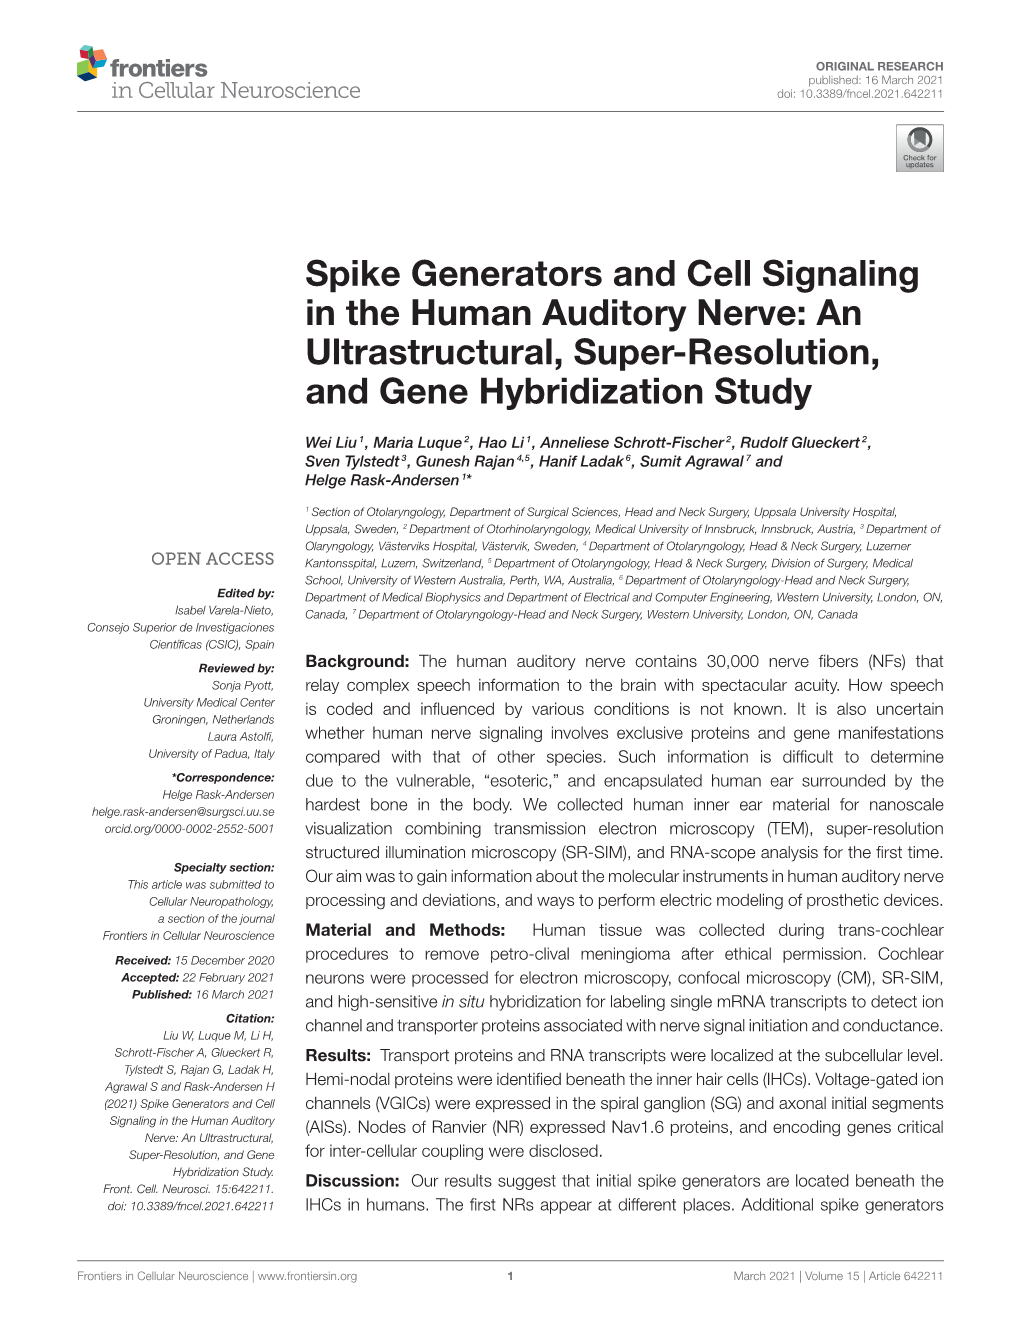 Spike Generators and Cell Signaling in the Human Auditory Nerve: an Ultrastructural, Super-Resolution, and Gene Hybridization Study